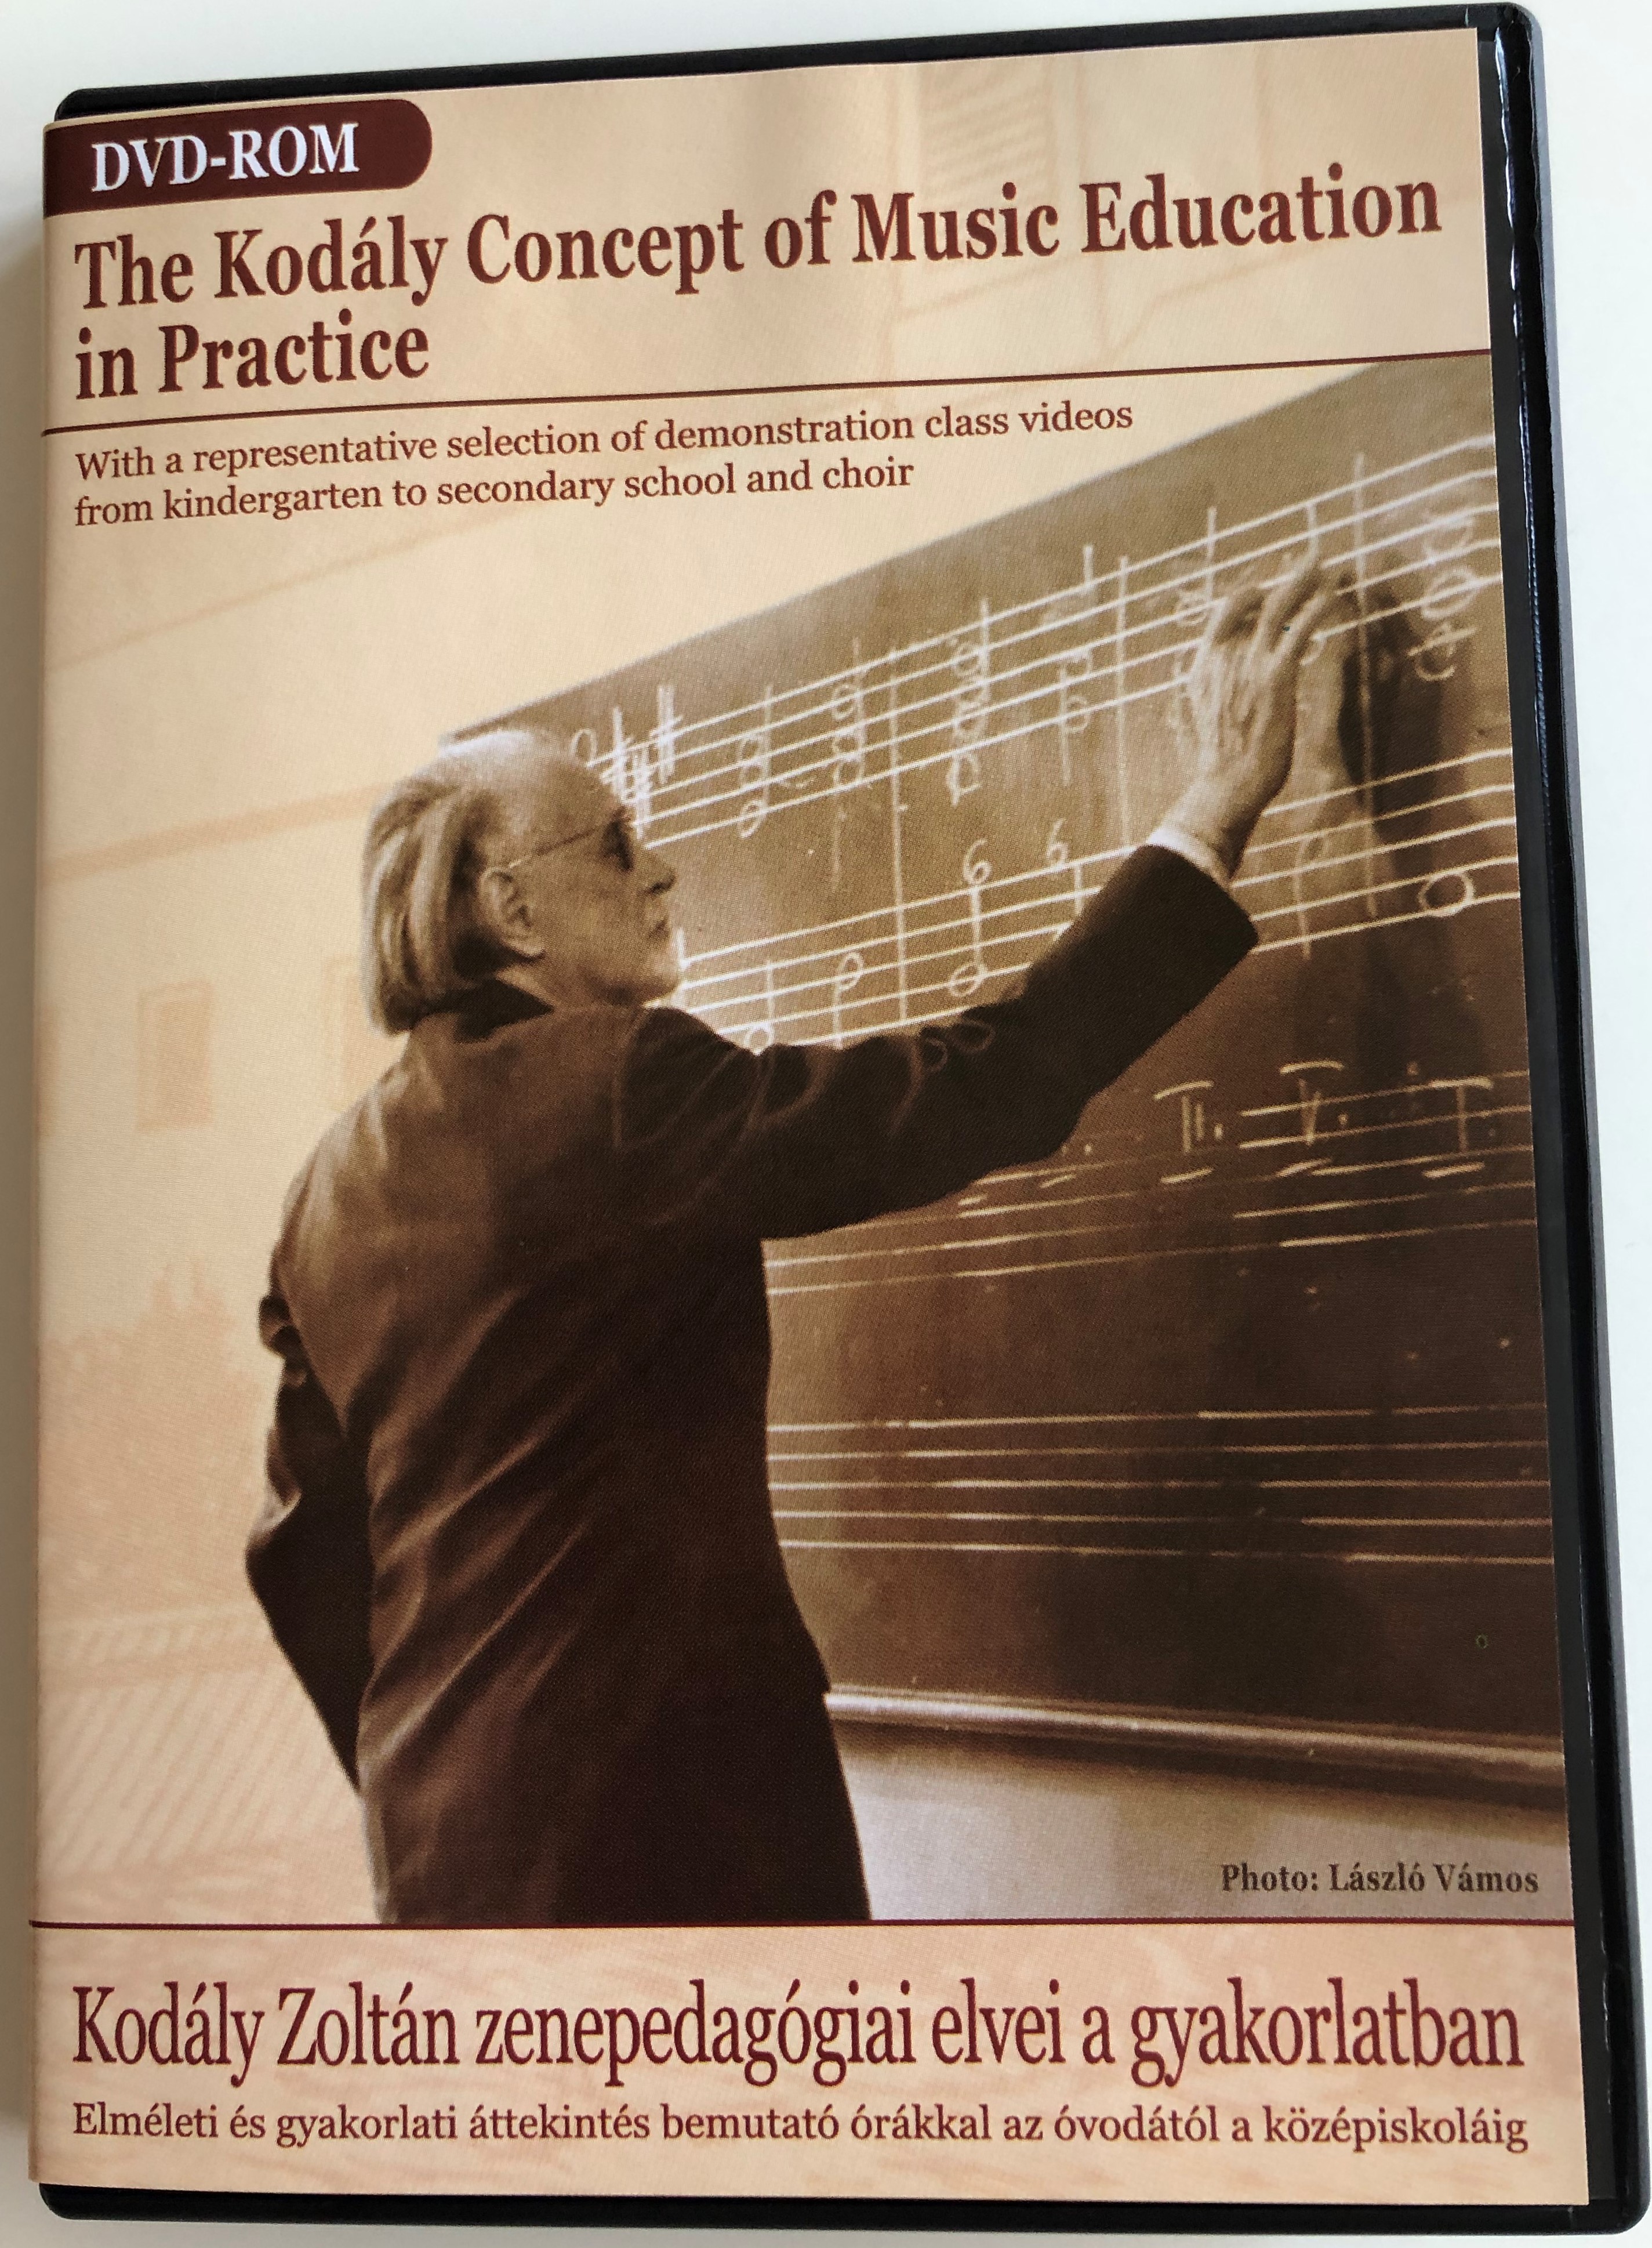 The Kodály Concept of Music Education in practice DVD ROM 1.JPG